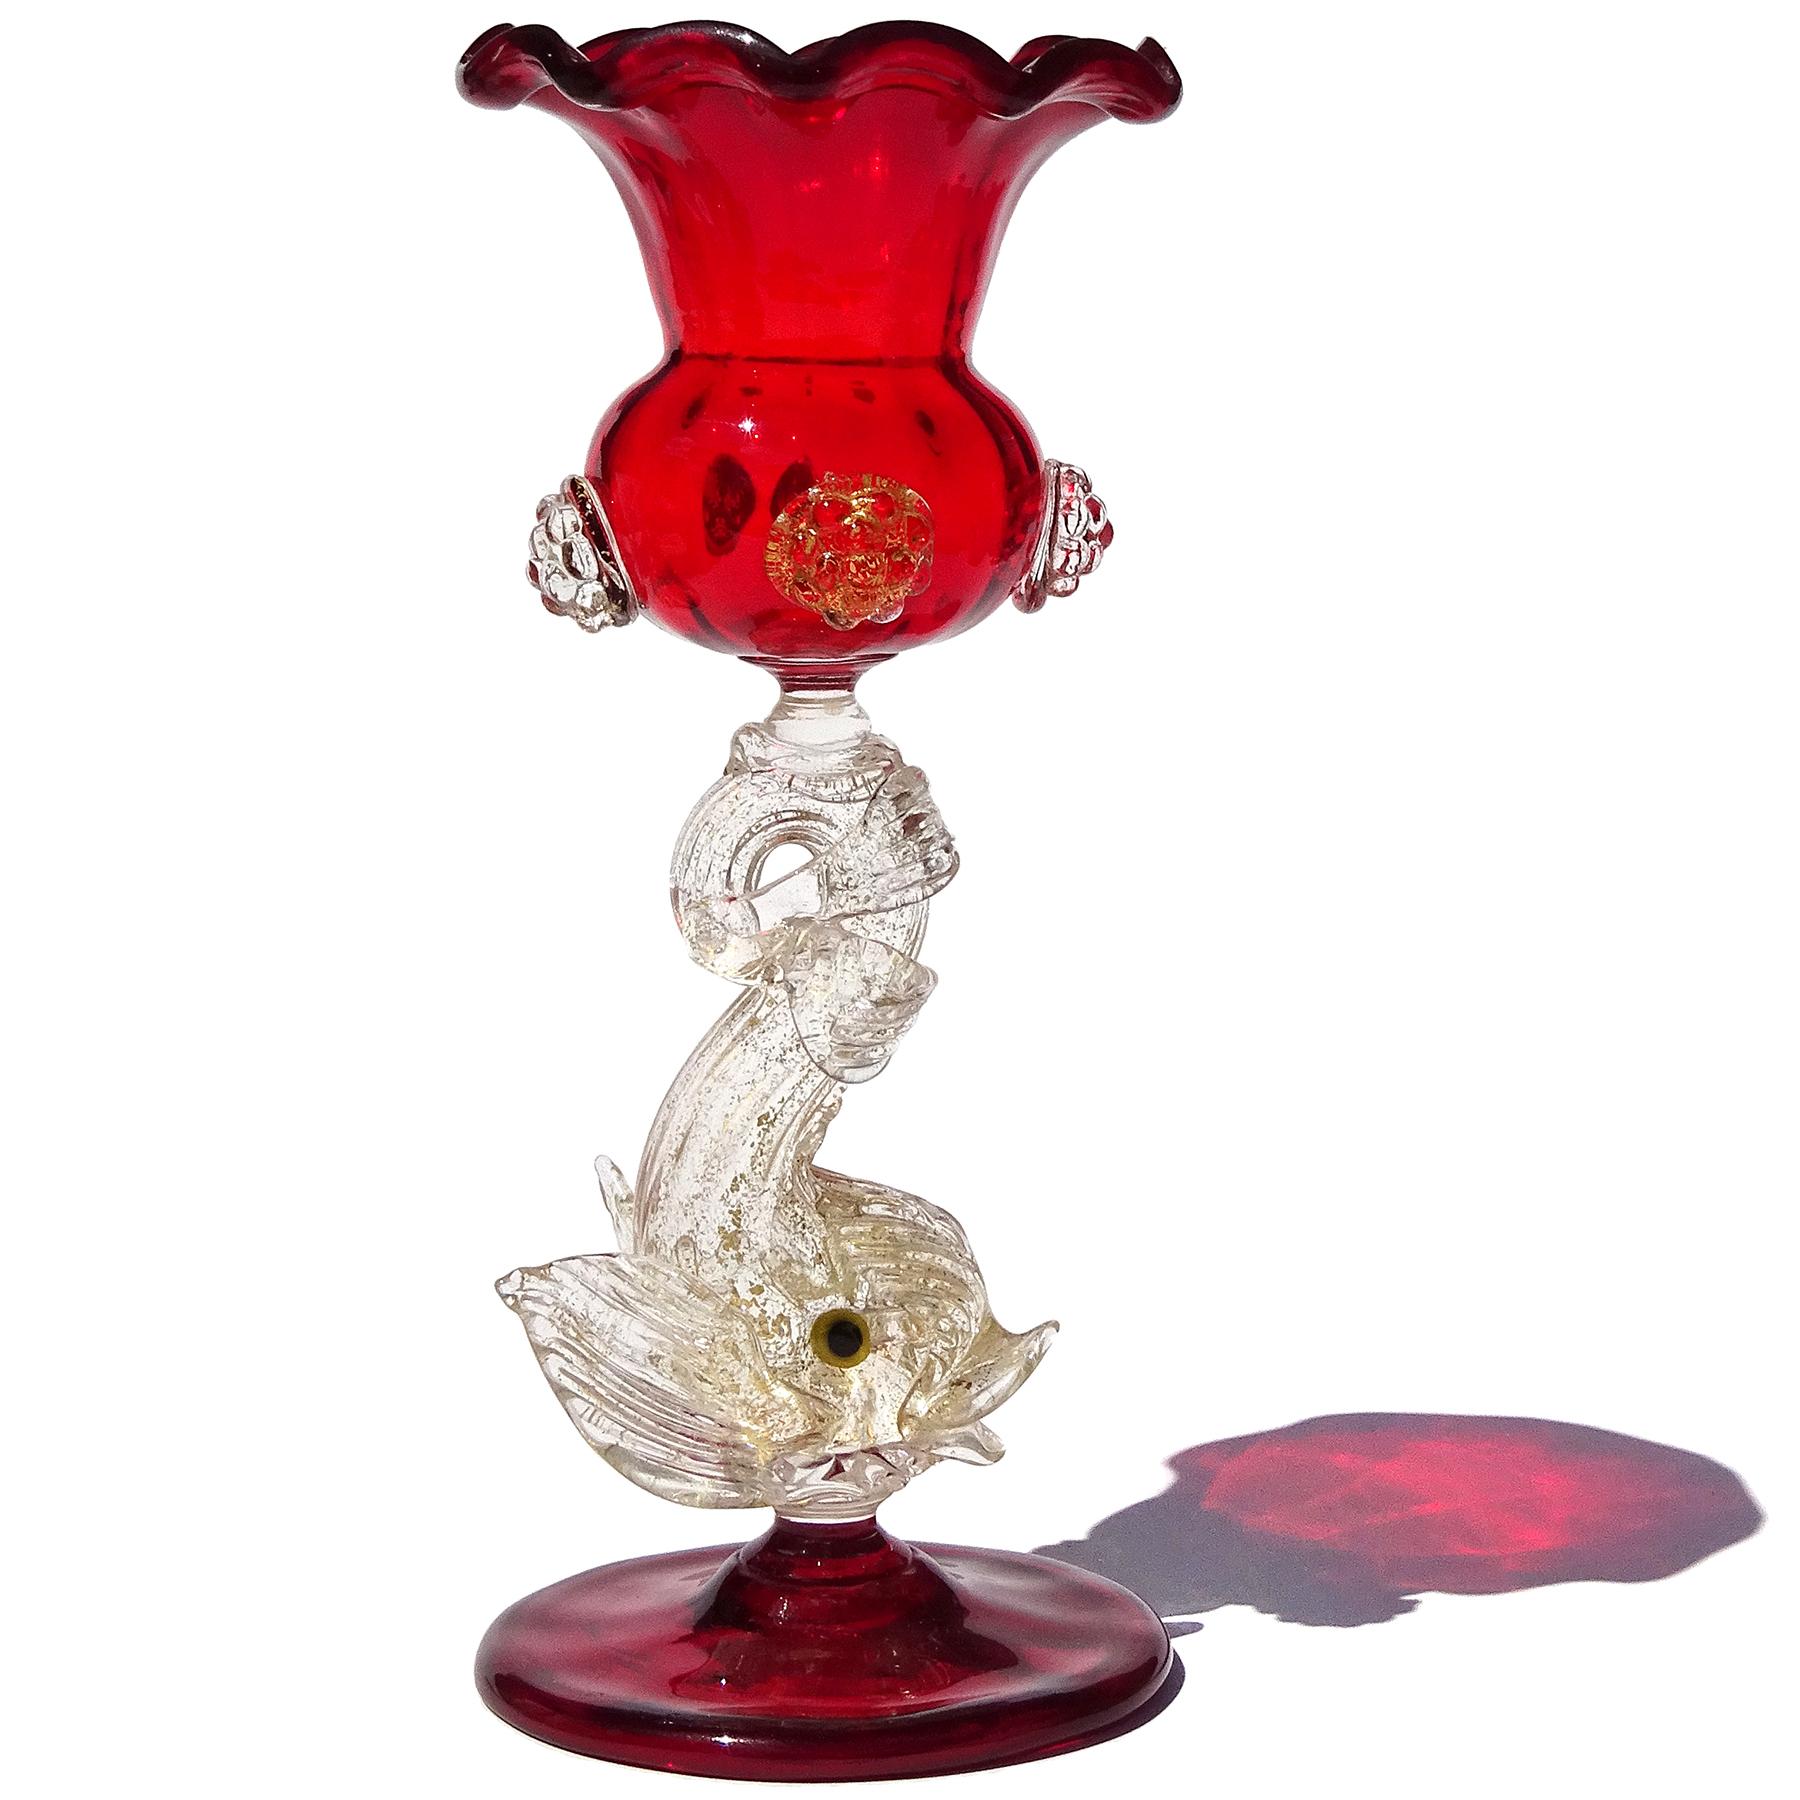 Beautiful, antique, early Venetian / Murano hand blown ruby red with gold flecks Italian art glass with ornate fish stem vase / table object. Created in the manner of the Salviati and Fratelli Toso companies. The color is a bright red, with clear